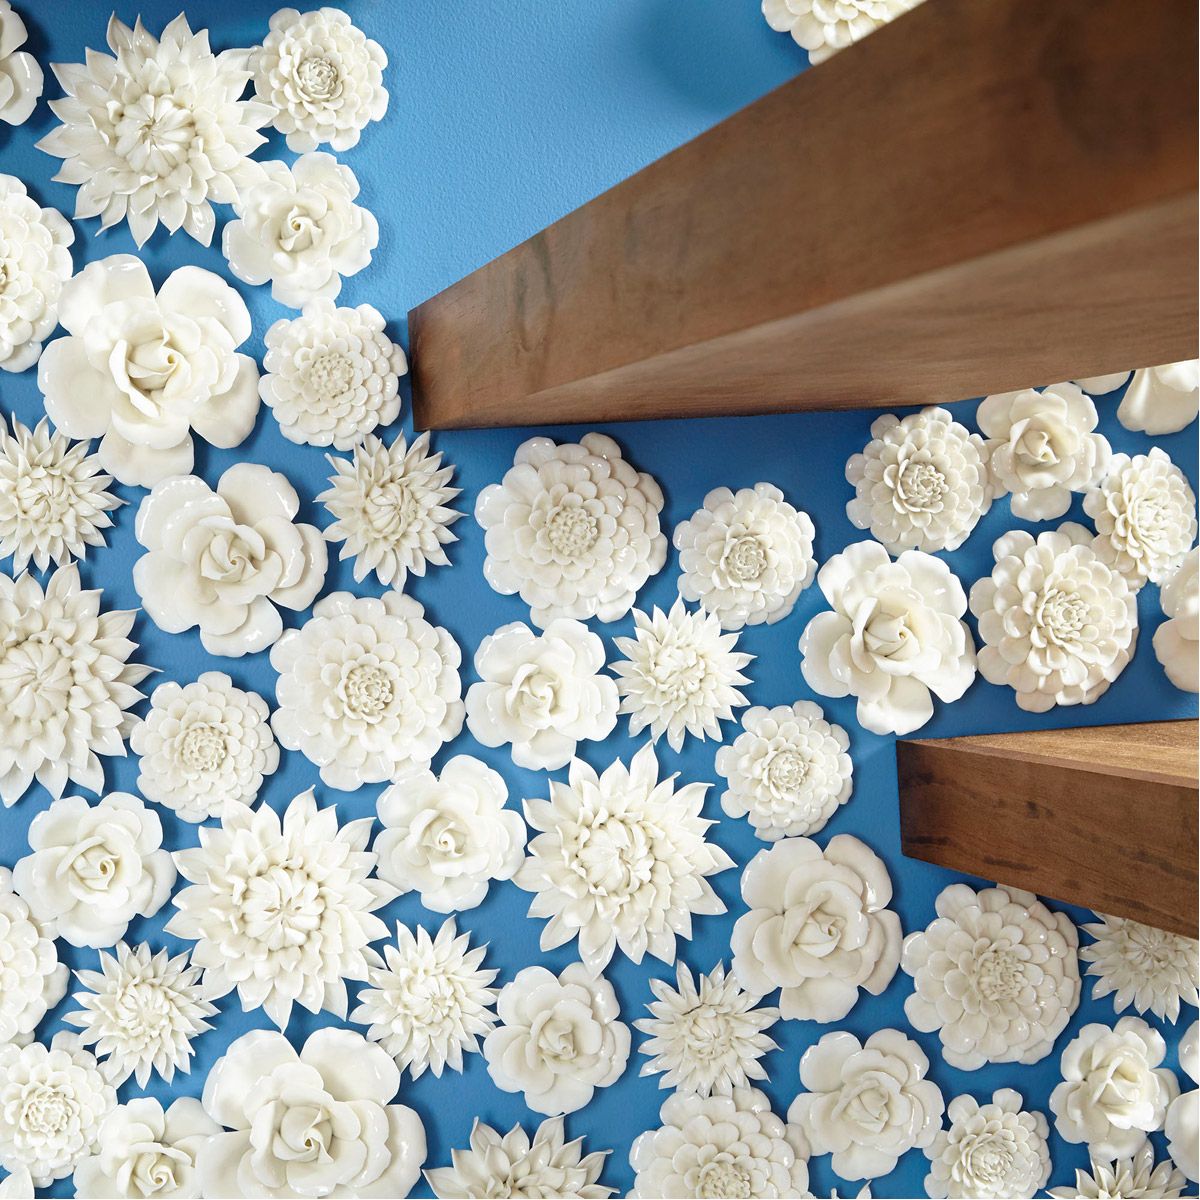 Cyan Design 09113 Blossoming Spring Off White Glaze Wall Decor, Medium Within Best And Newest Cyan Wall Art (View 16 of 20)